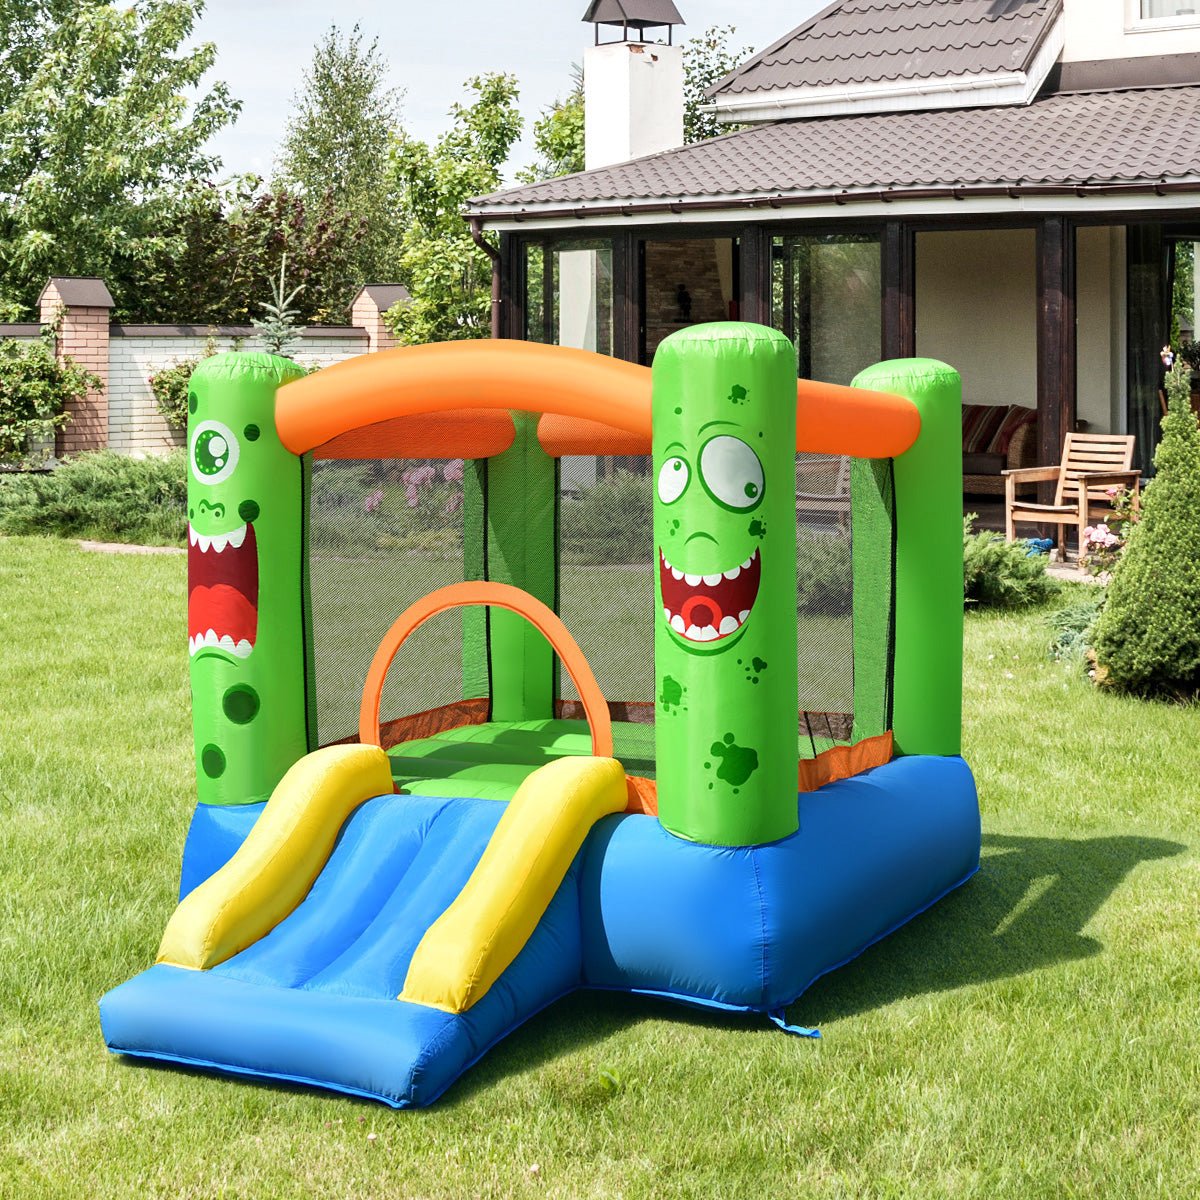 Boundless Energy: Inflatable Playhouse with Basketball Rim & Slide for Kids